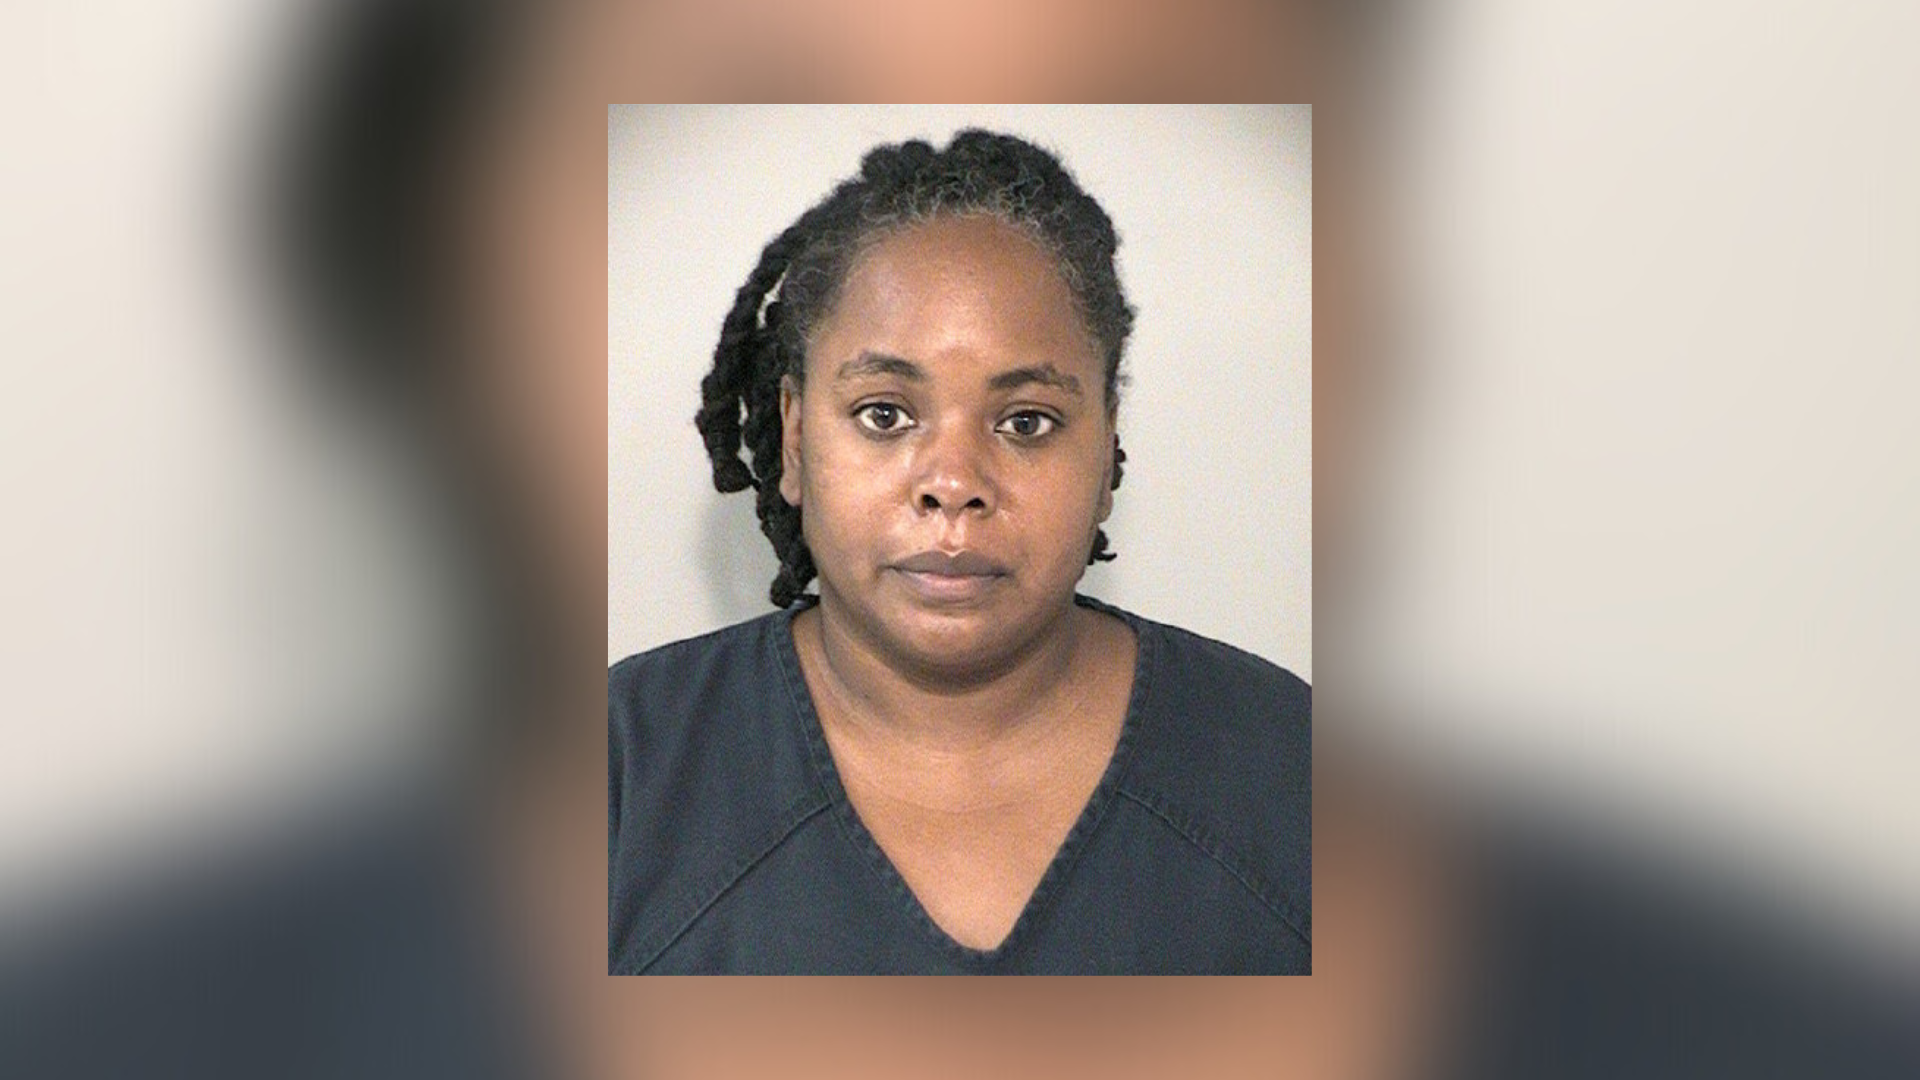 DA Fort Bend County mother sentenced to 30 years for failing to protect 13-year-old child bride of 47-year-old